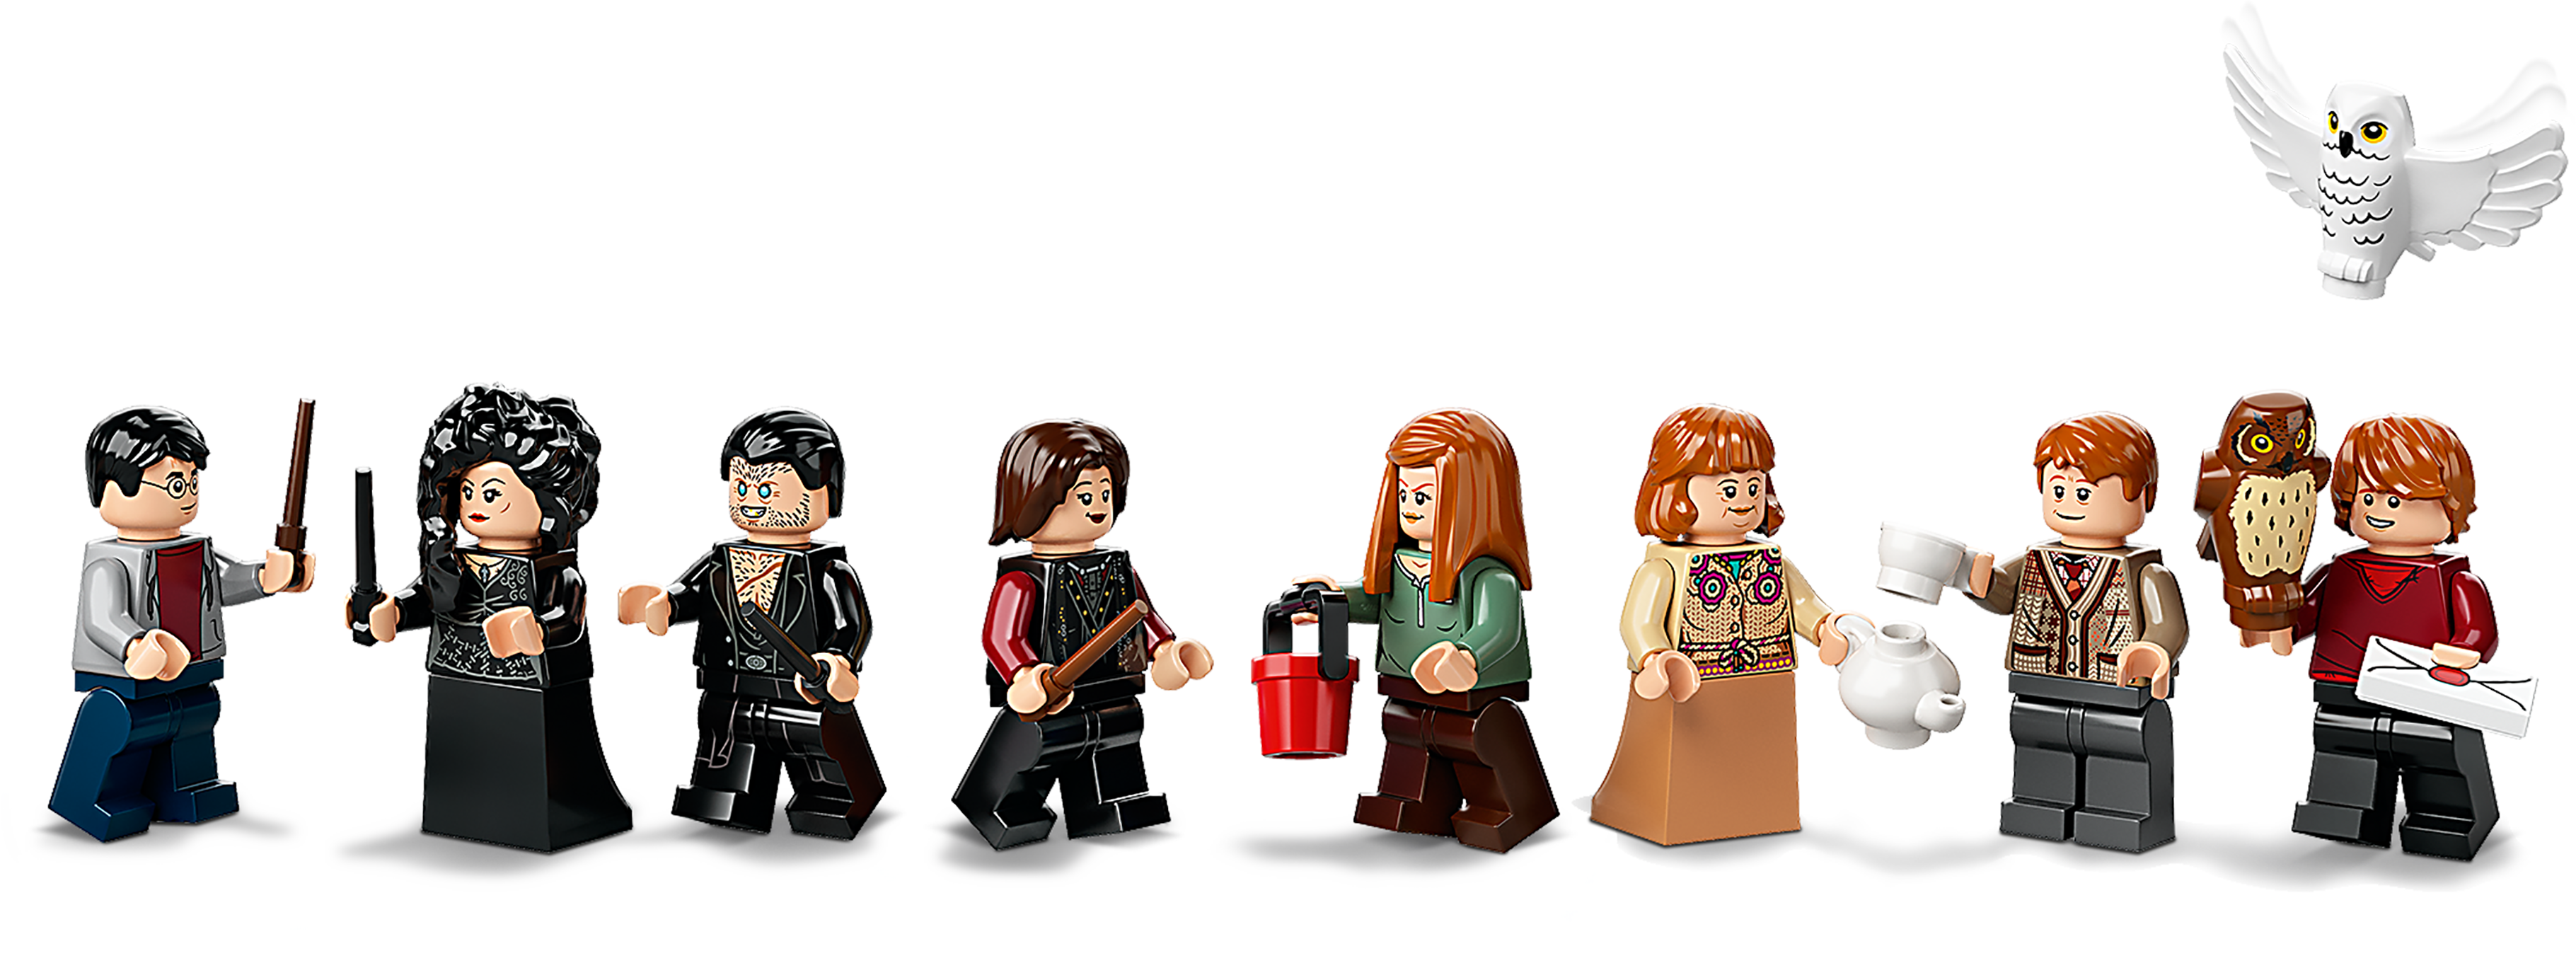 LEGO Harry Potter 75980 Attack on the Burrow 1047 pcs Death Eaters New